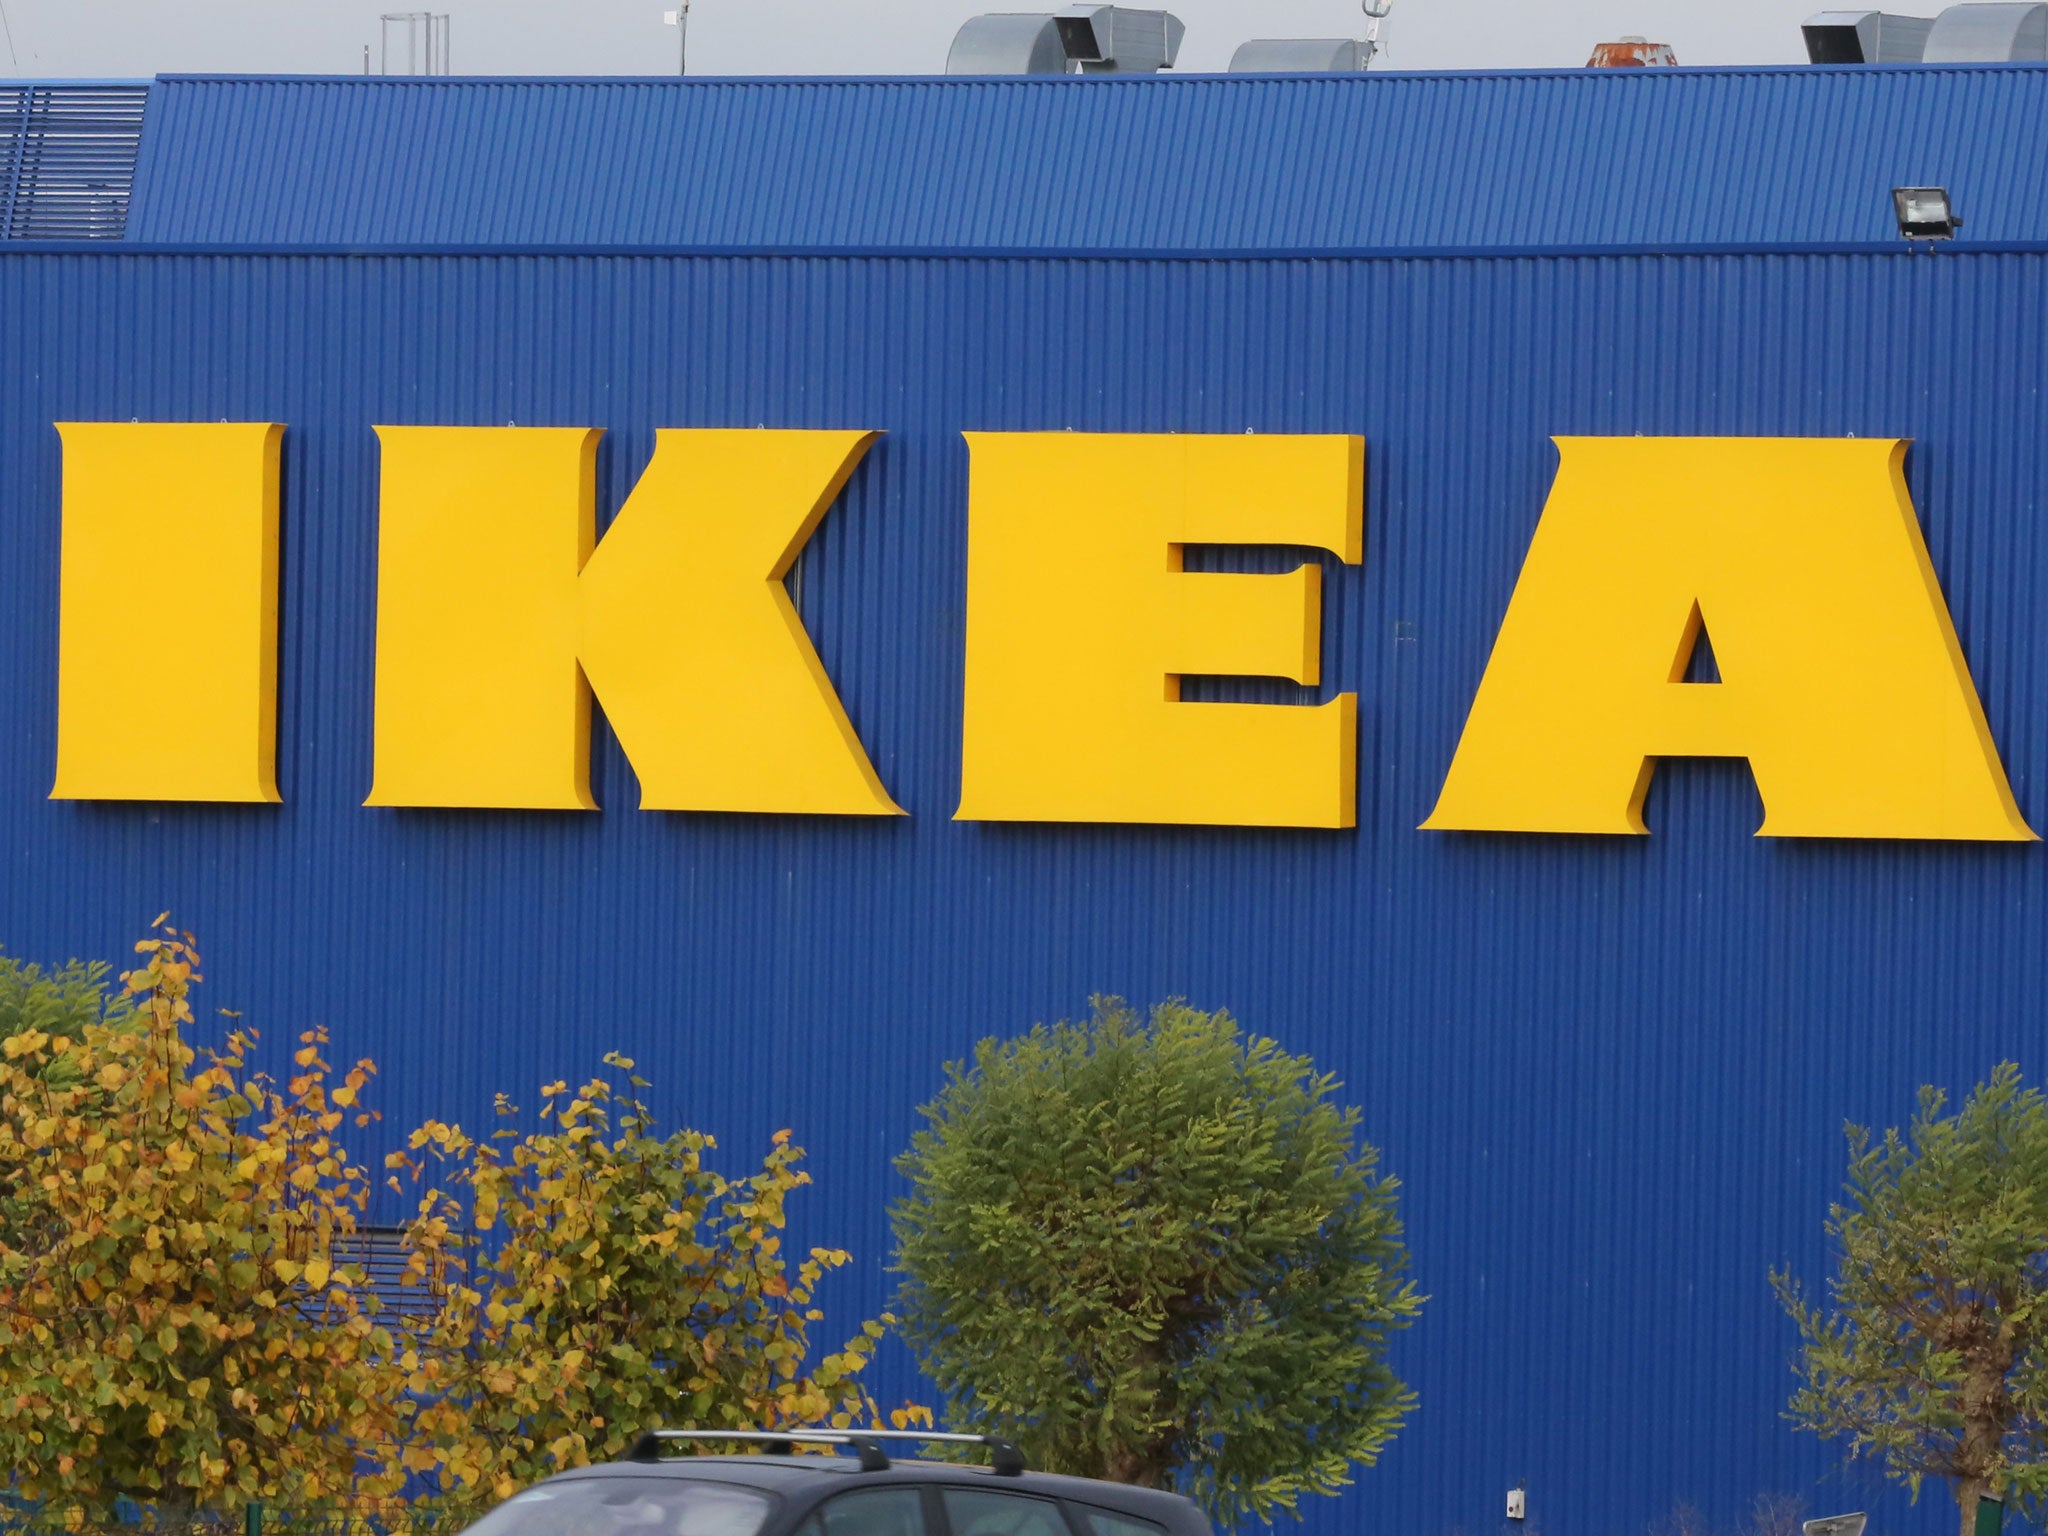 Ikea has 315 stores in 27 countries but around 70 per cent of its sales come from its home market of Europe